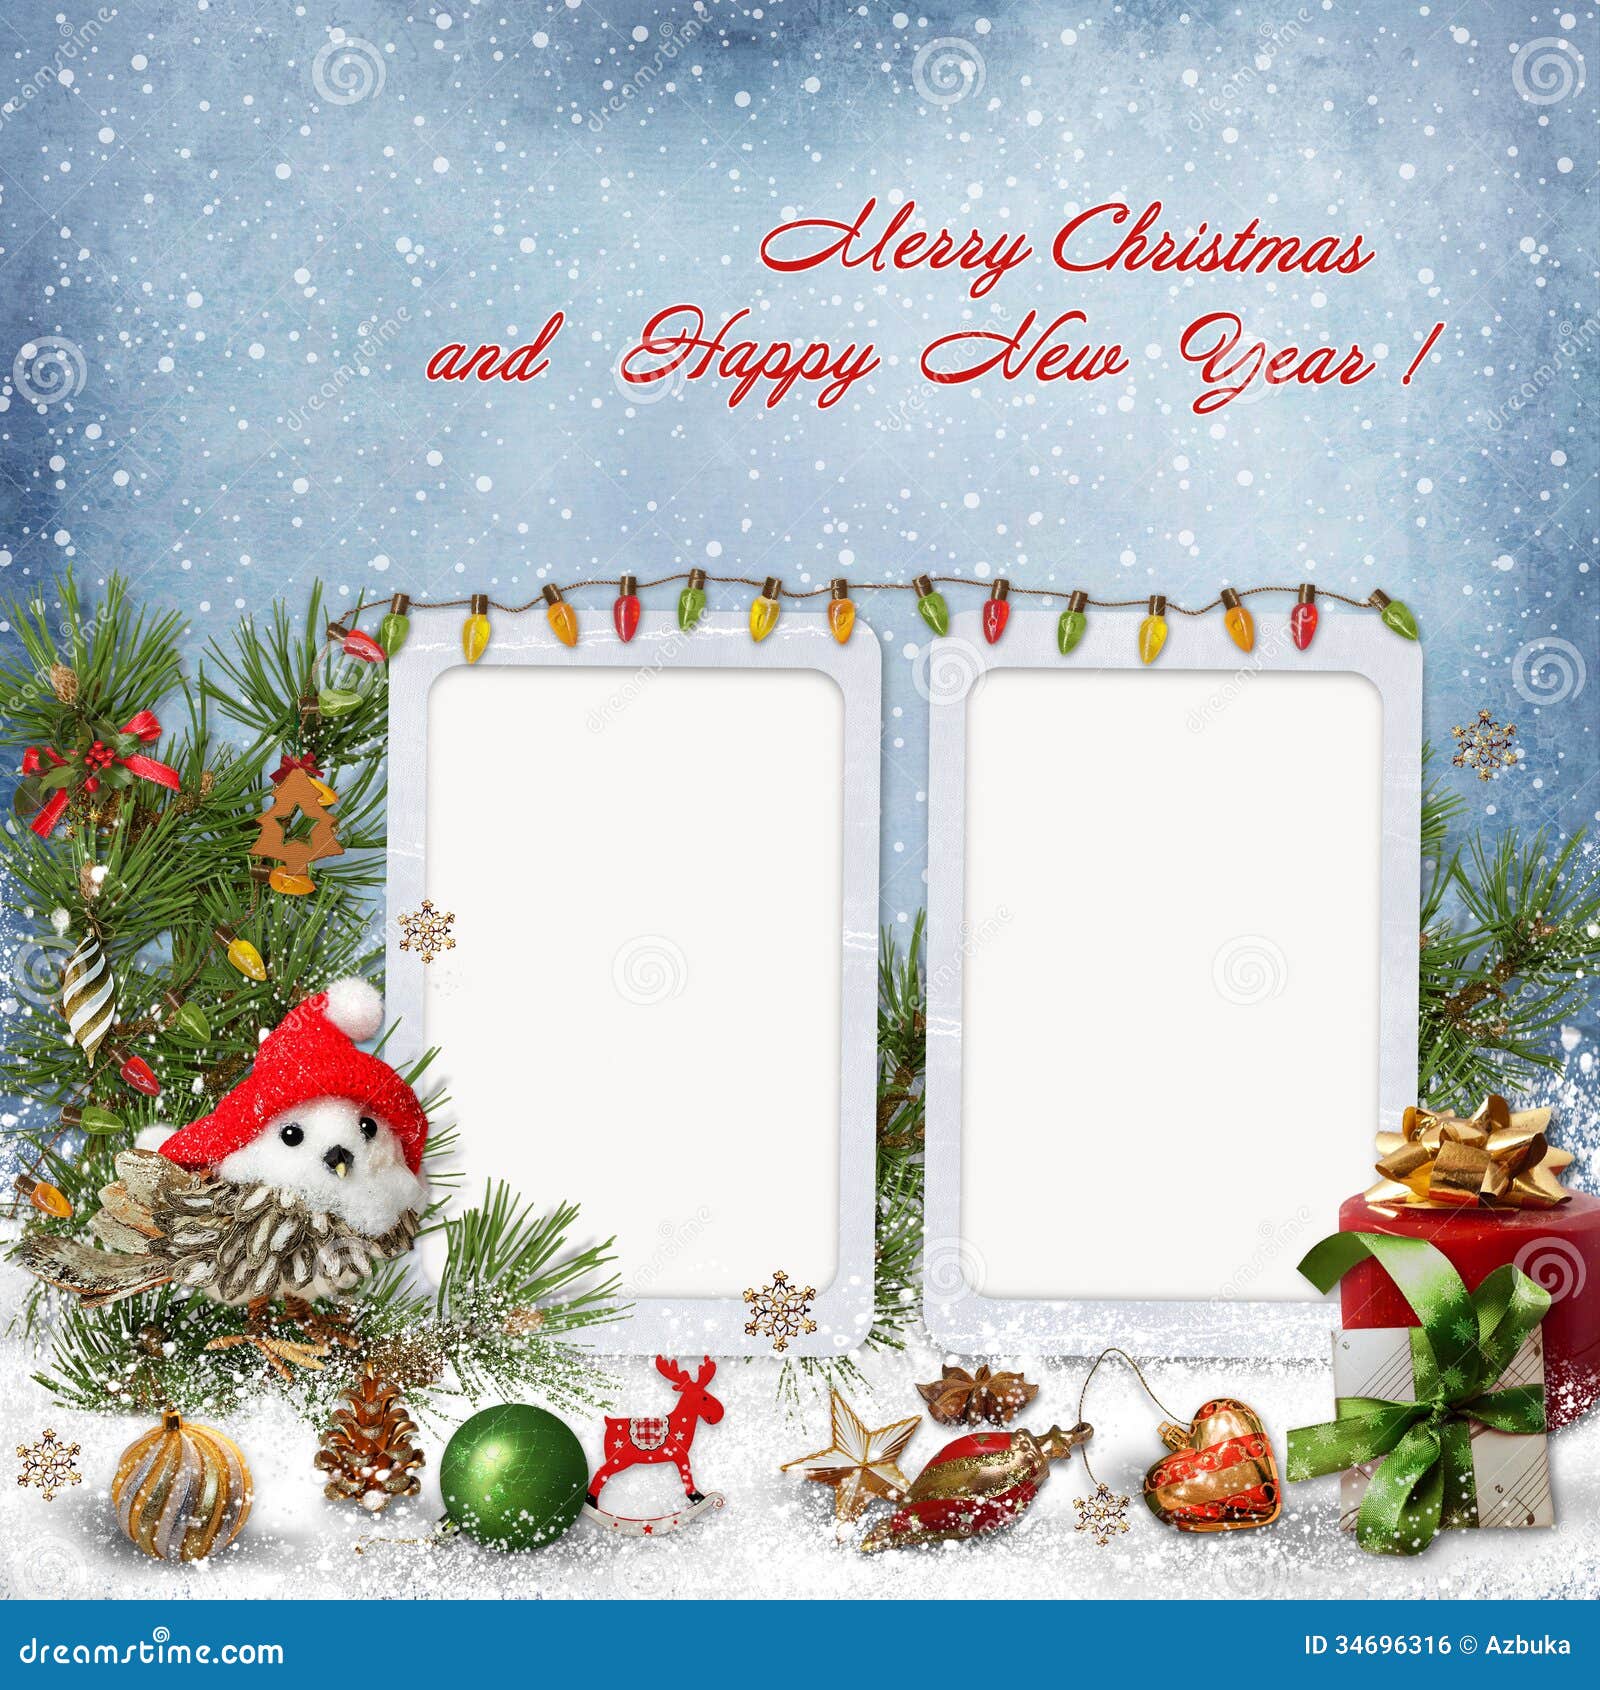 Christmas Decoration With Frames On A Snowy Background 